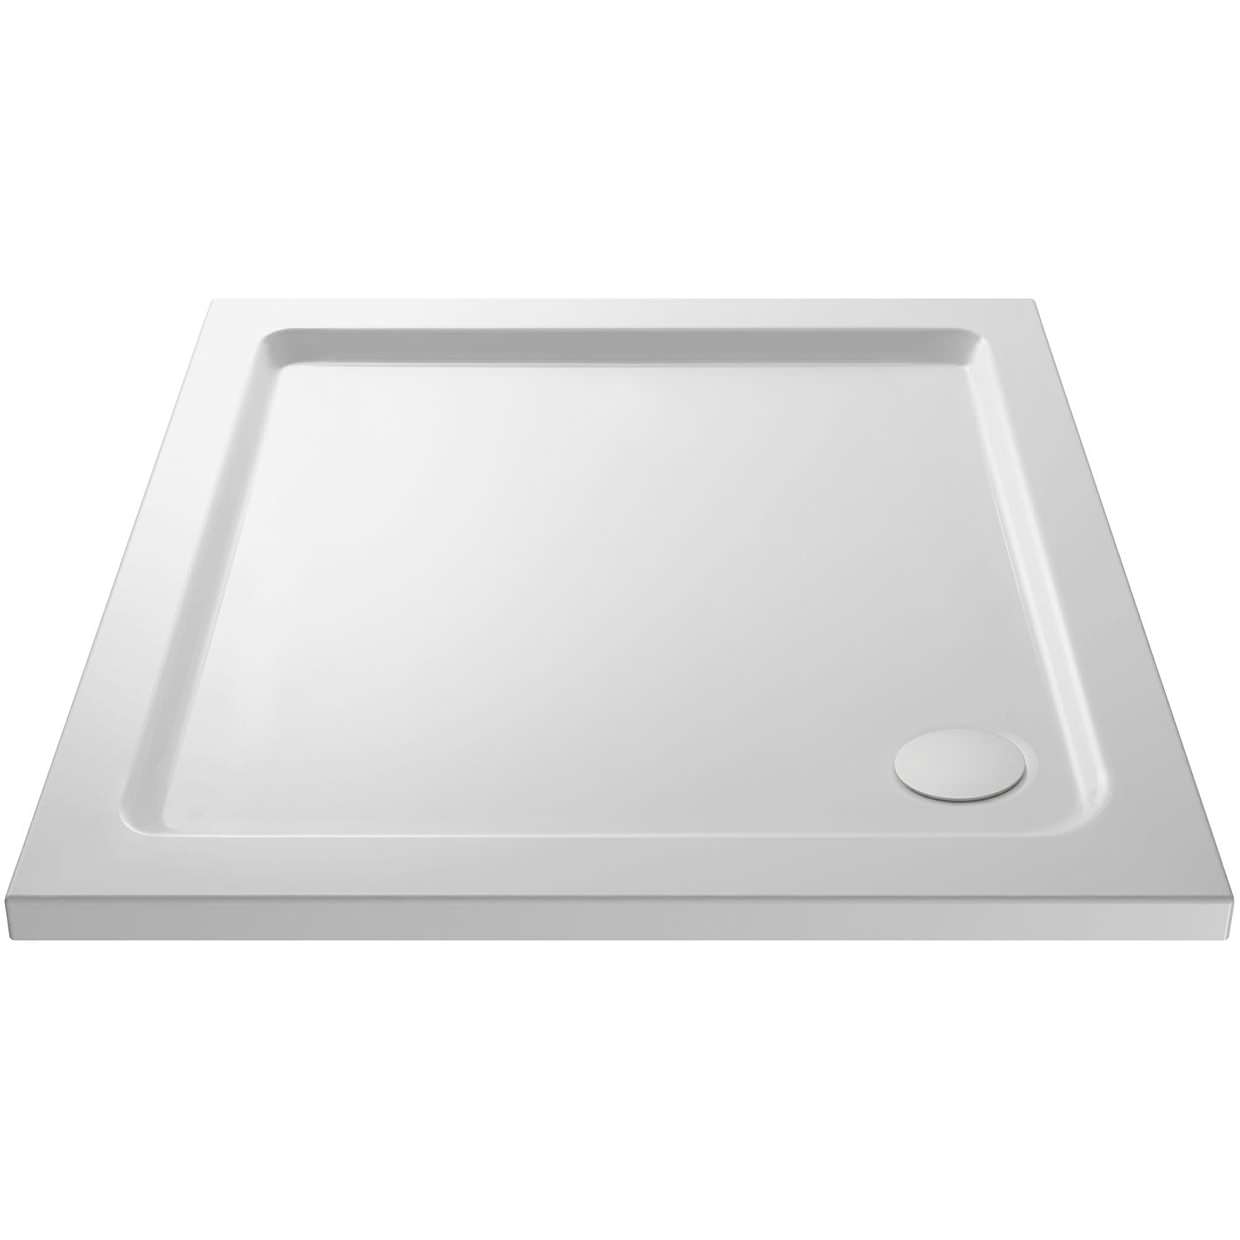 Slim 900 x 900 Square Stone Resin Shower Tray White For Wetroom Enclosure